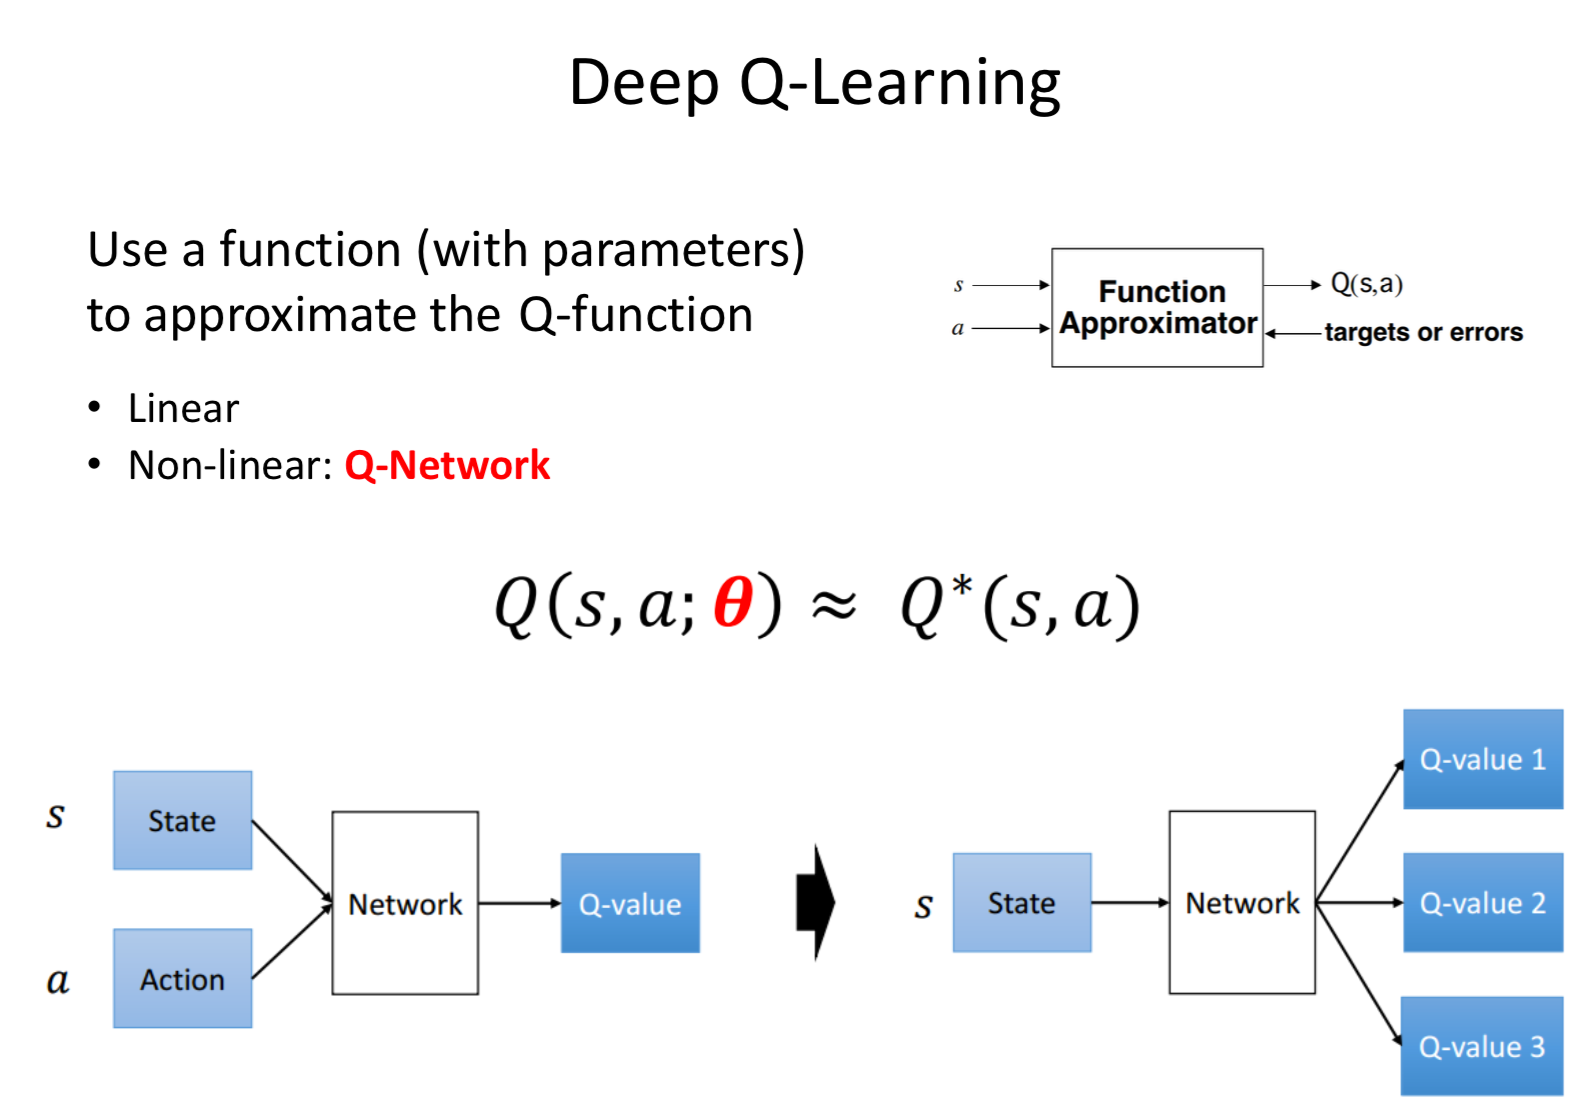 MIT 6.S094: Deep Learning for Self-Driving Cars 2018 Lecture 3 Notes: Deep Reinforcement Learning